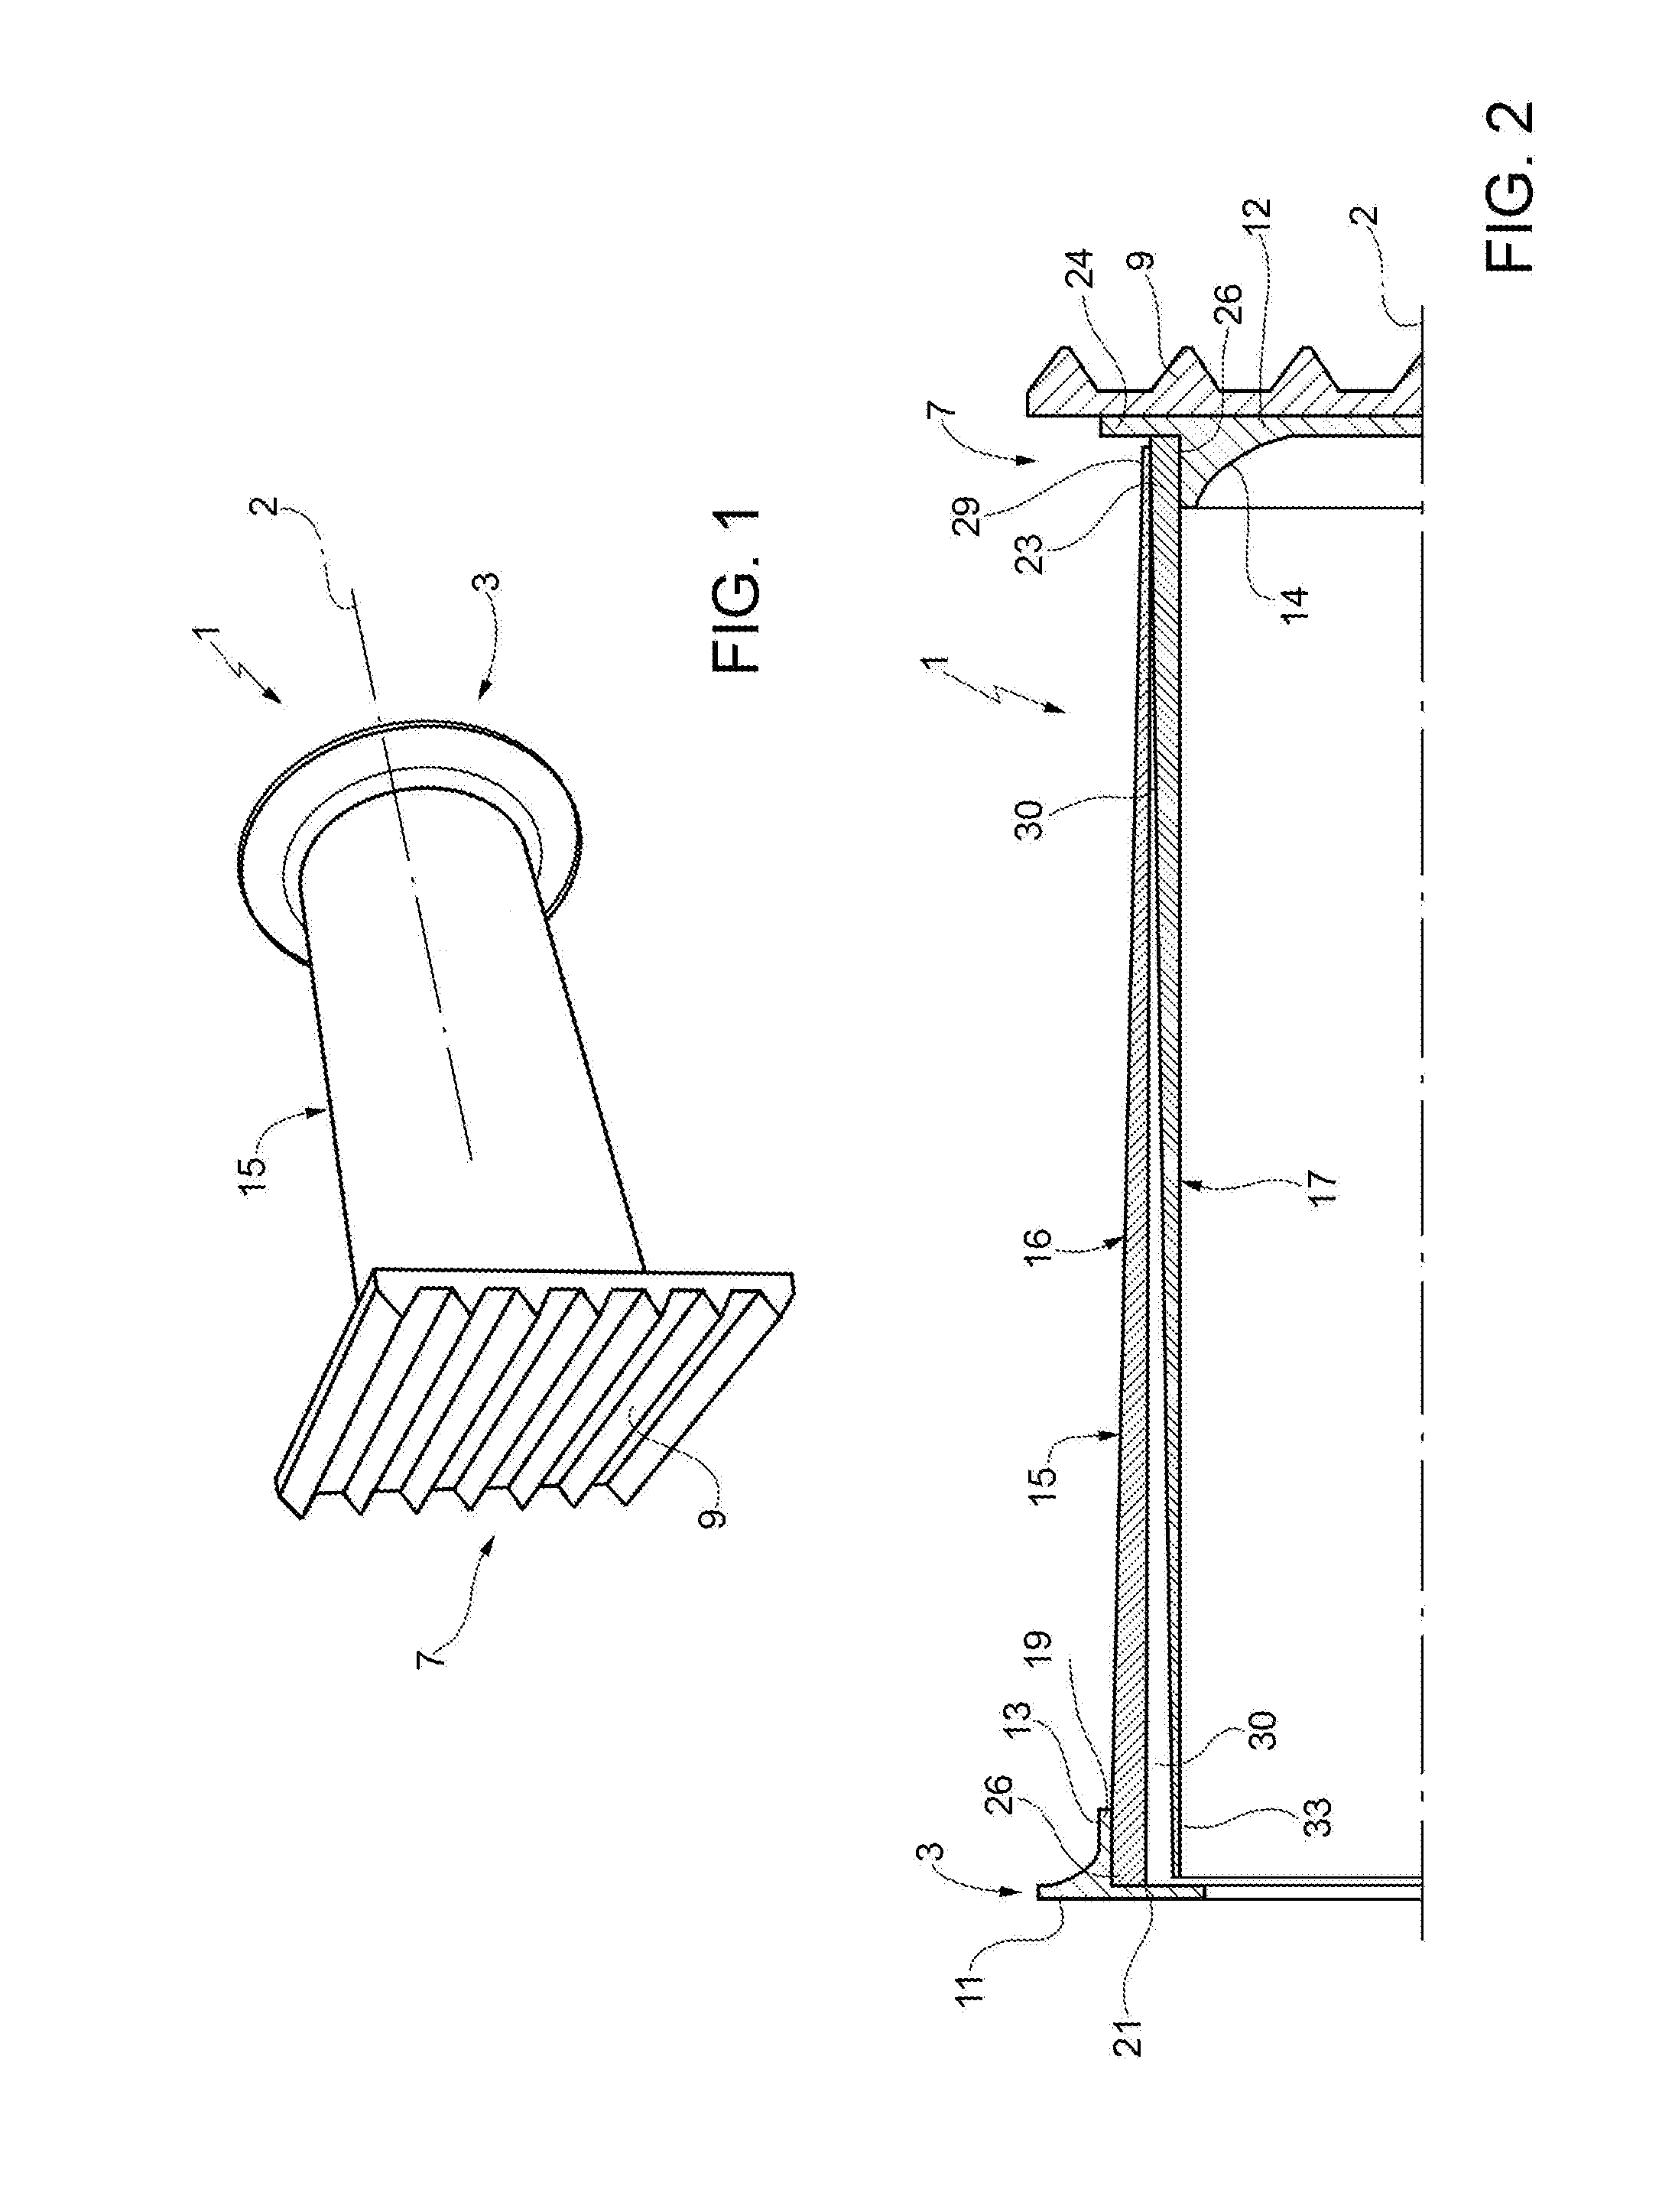 Energy-absorbing device, in particular for a rail-car